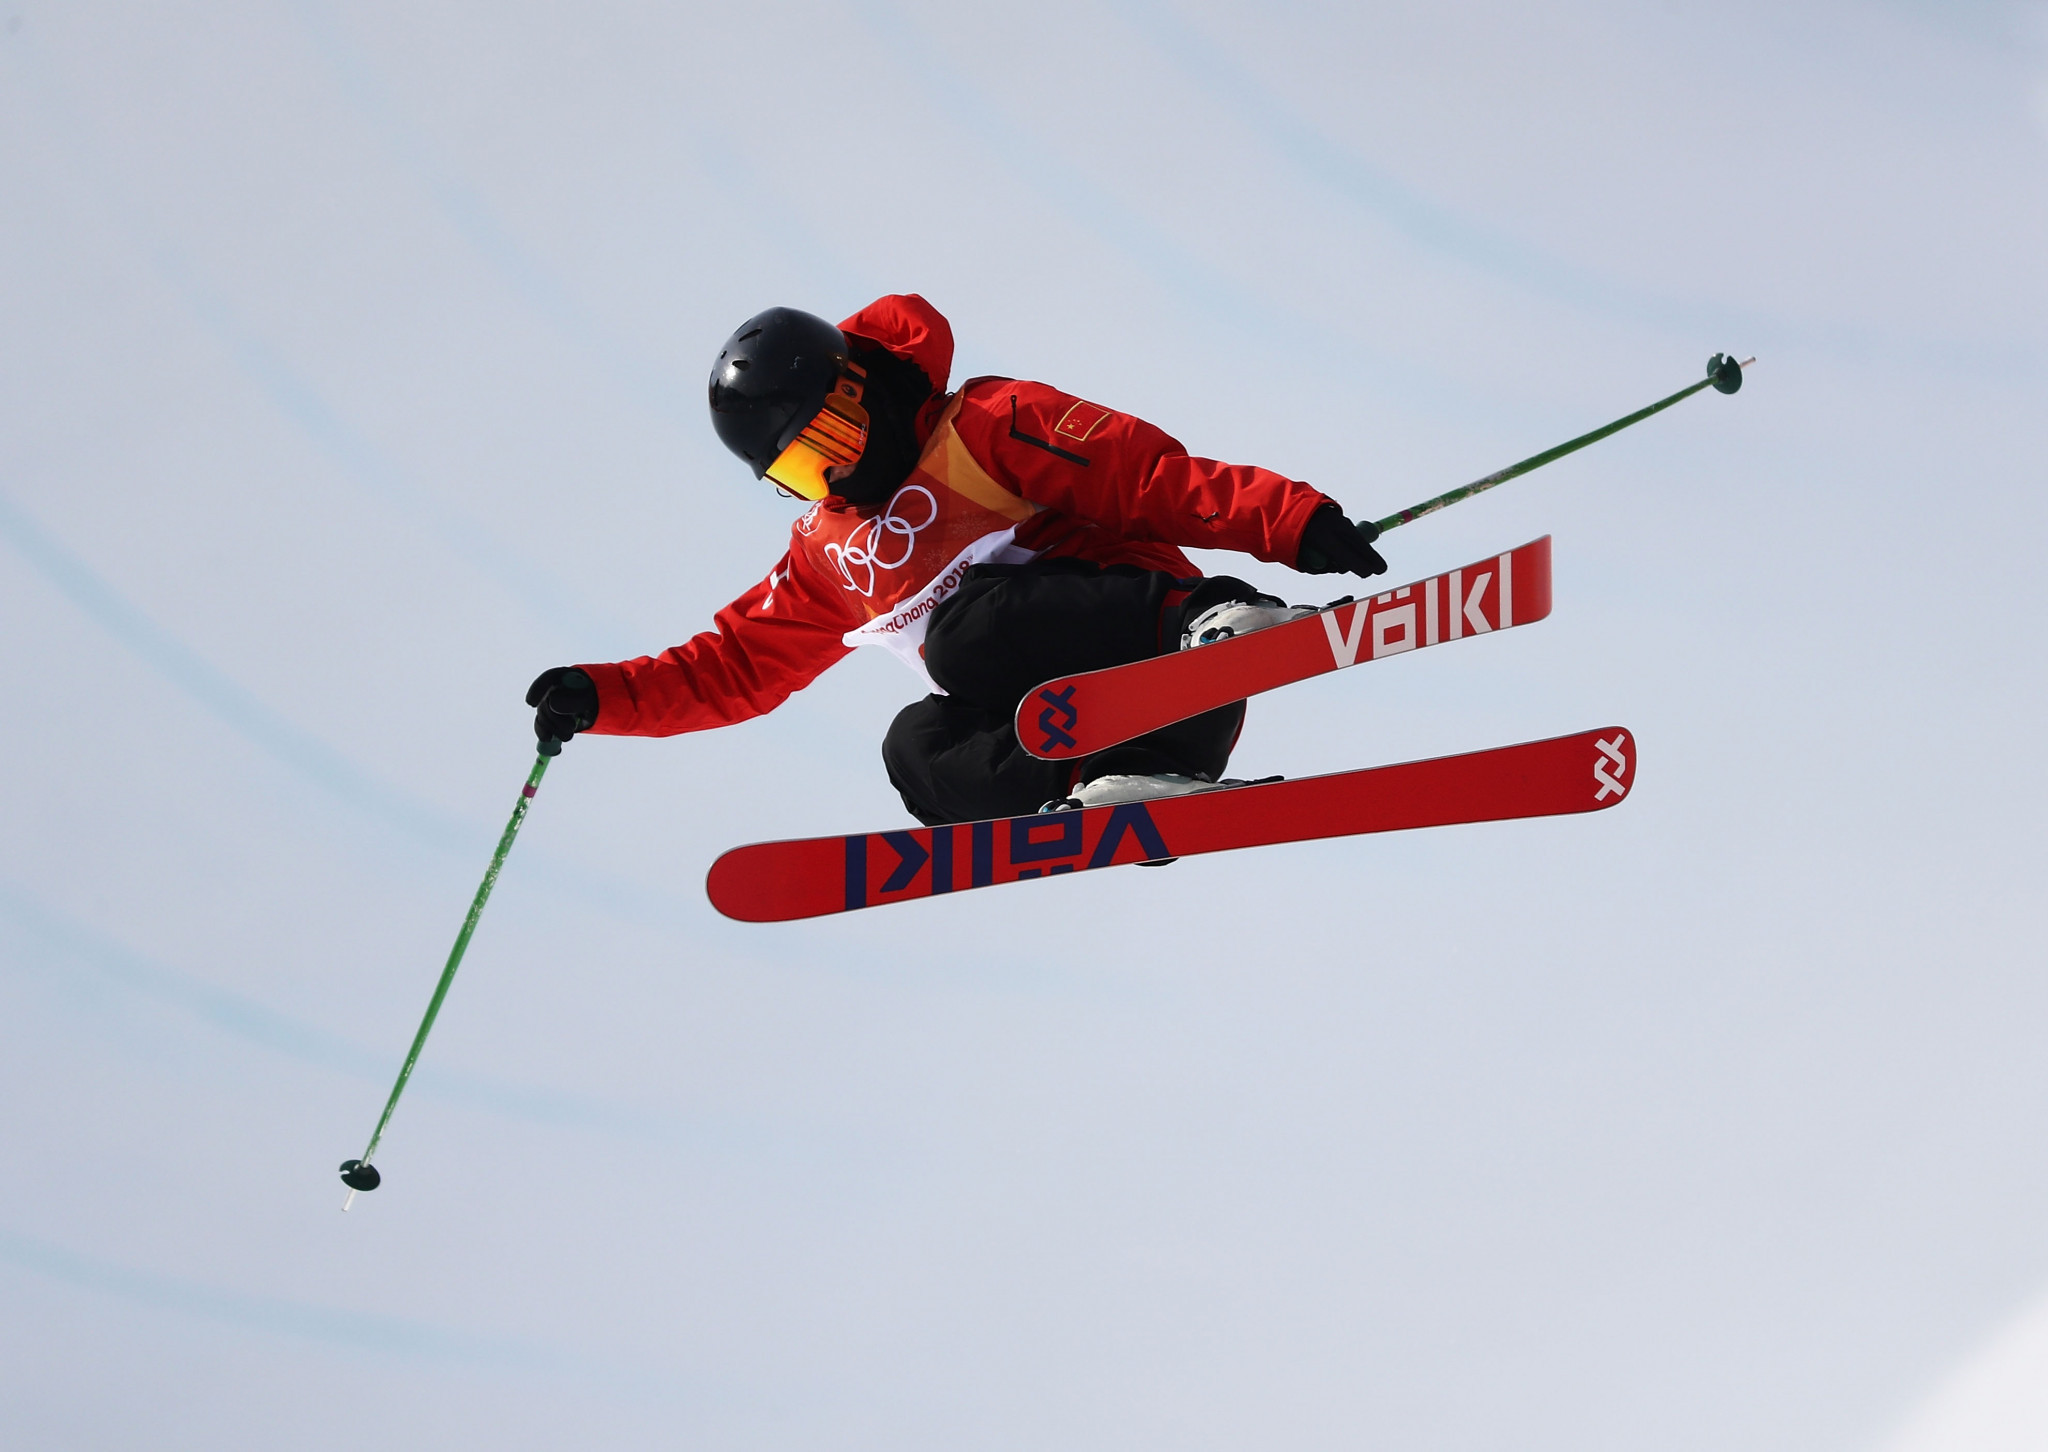 Home favourite Zhang Kexin won the women's halfpipe event at the FIS Freestyle Skiing World Cup in China's capital Beijing ©Getty Images